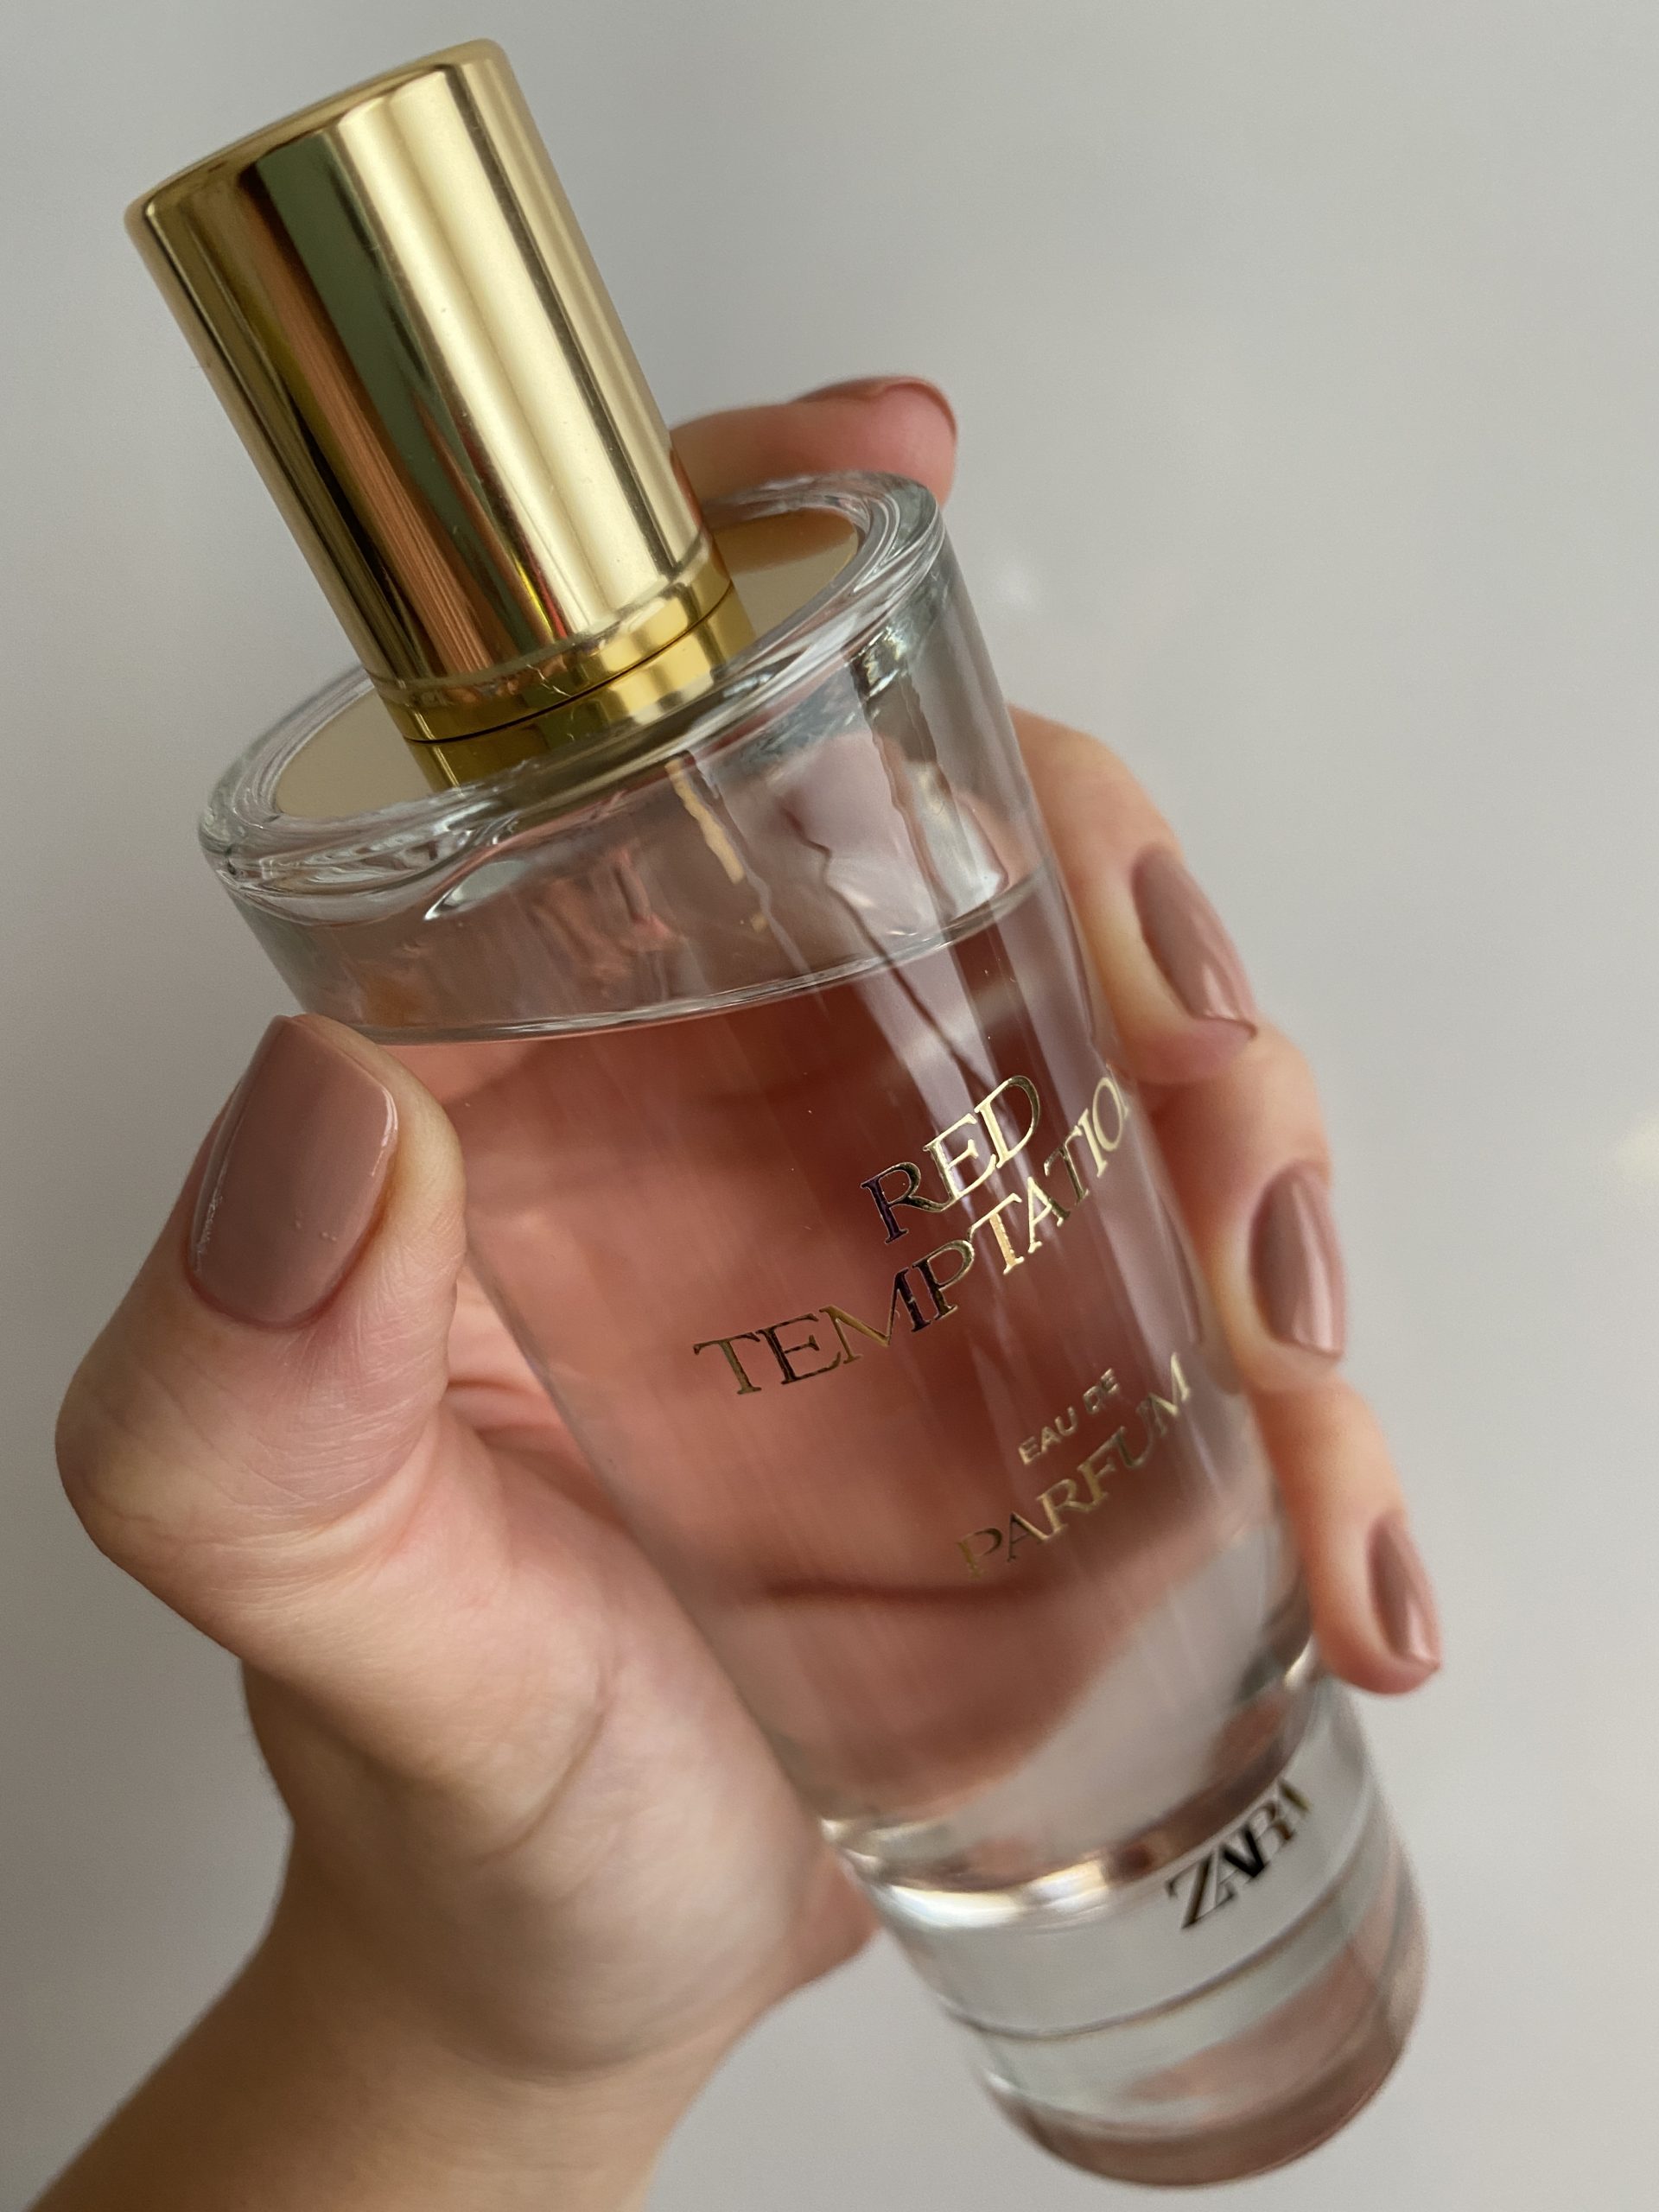 An Honest Review of Zara's Red Temptation Perfume